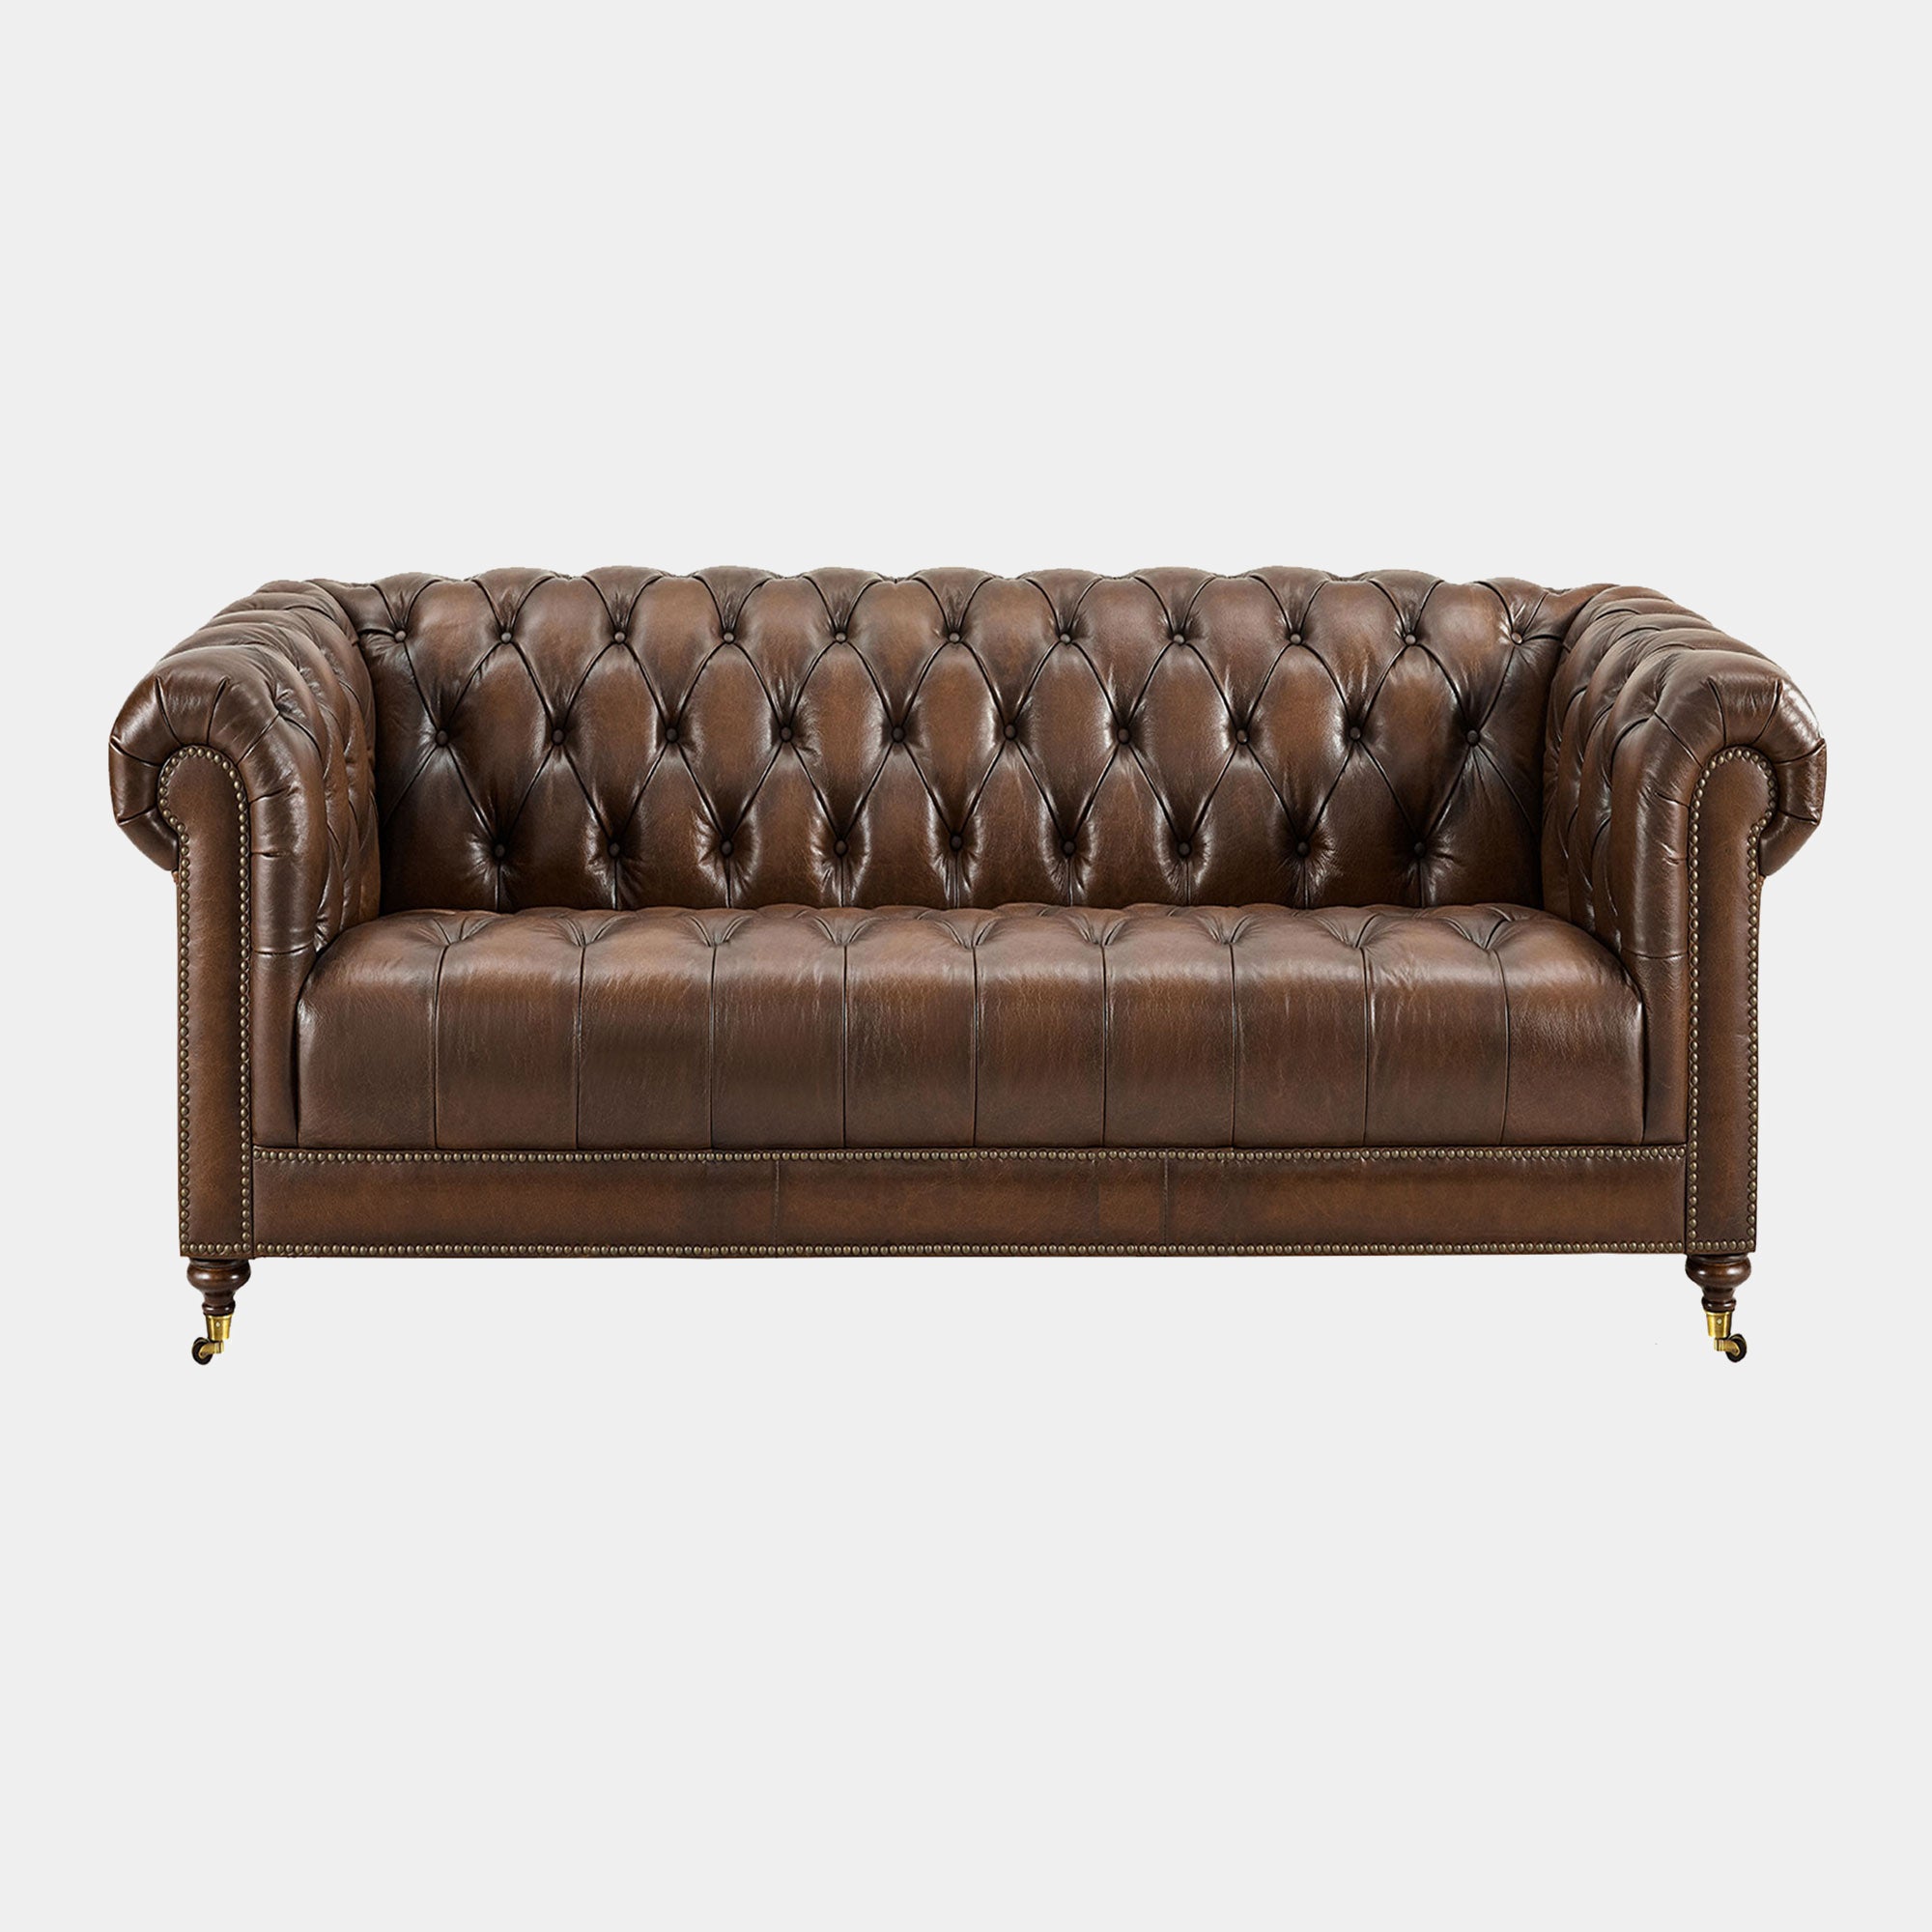 Churchill - 3.5 Seat Sofa In Leather Vintage LLS Cognac 1806/Antique Brass Studs With Mahogany Feet